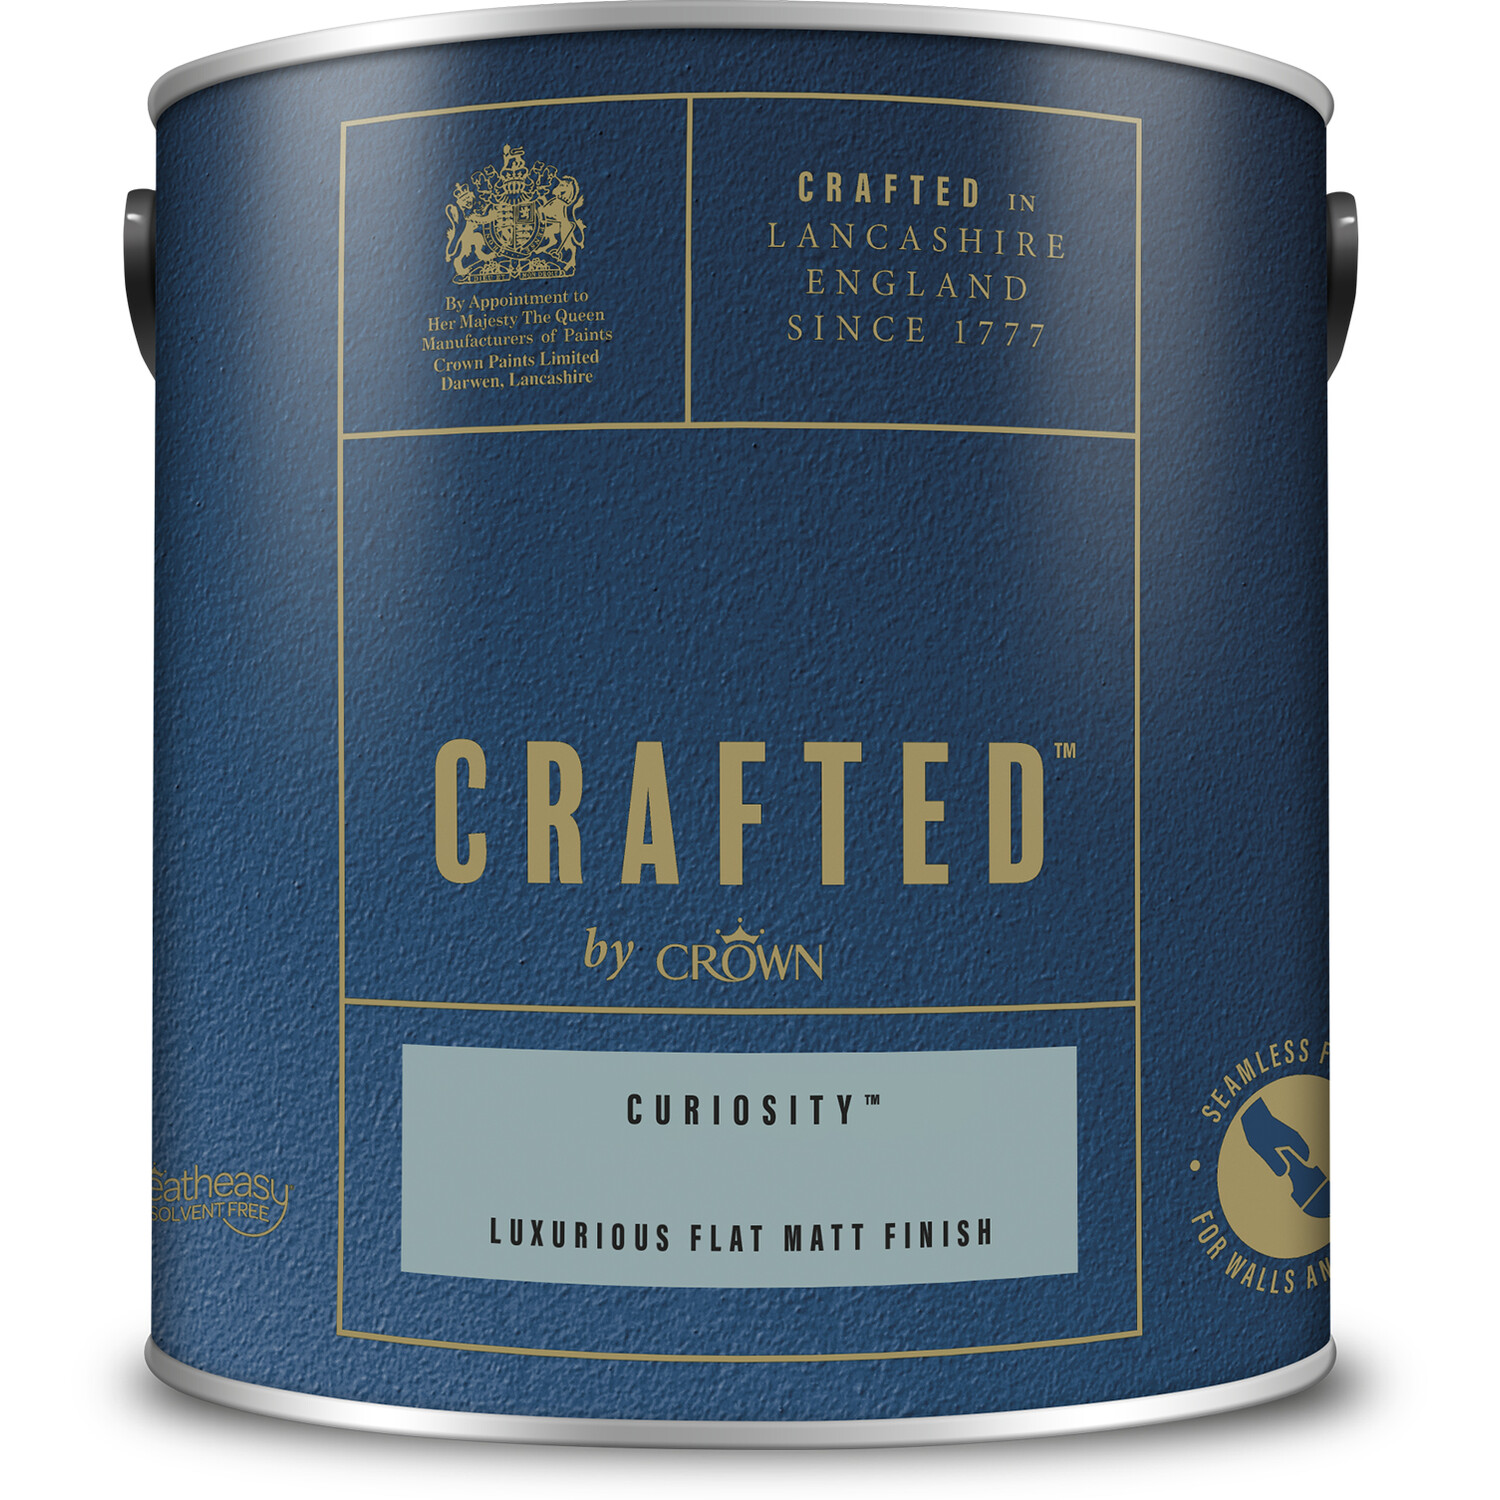 Crown Crafted Walls and Wood Curiosity Luxurious Flat Matt Paint 2.5L Image 2